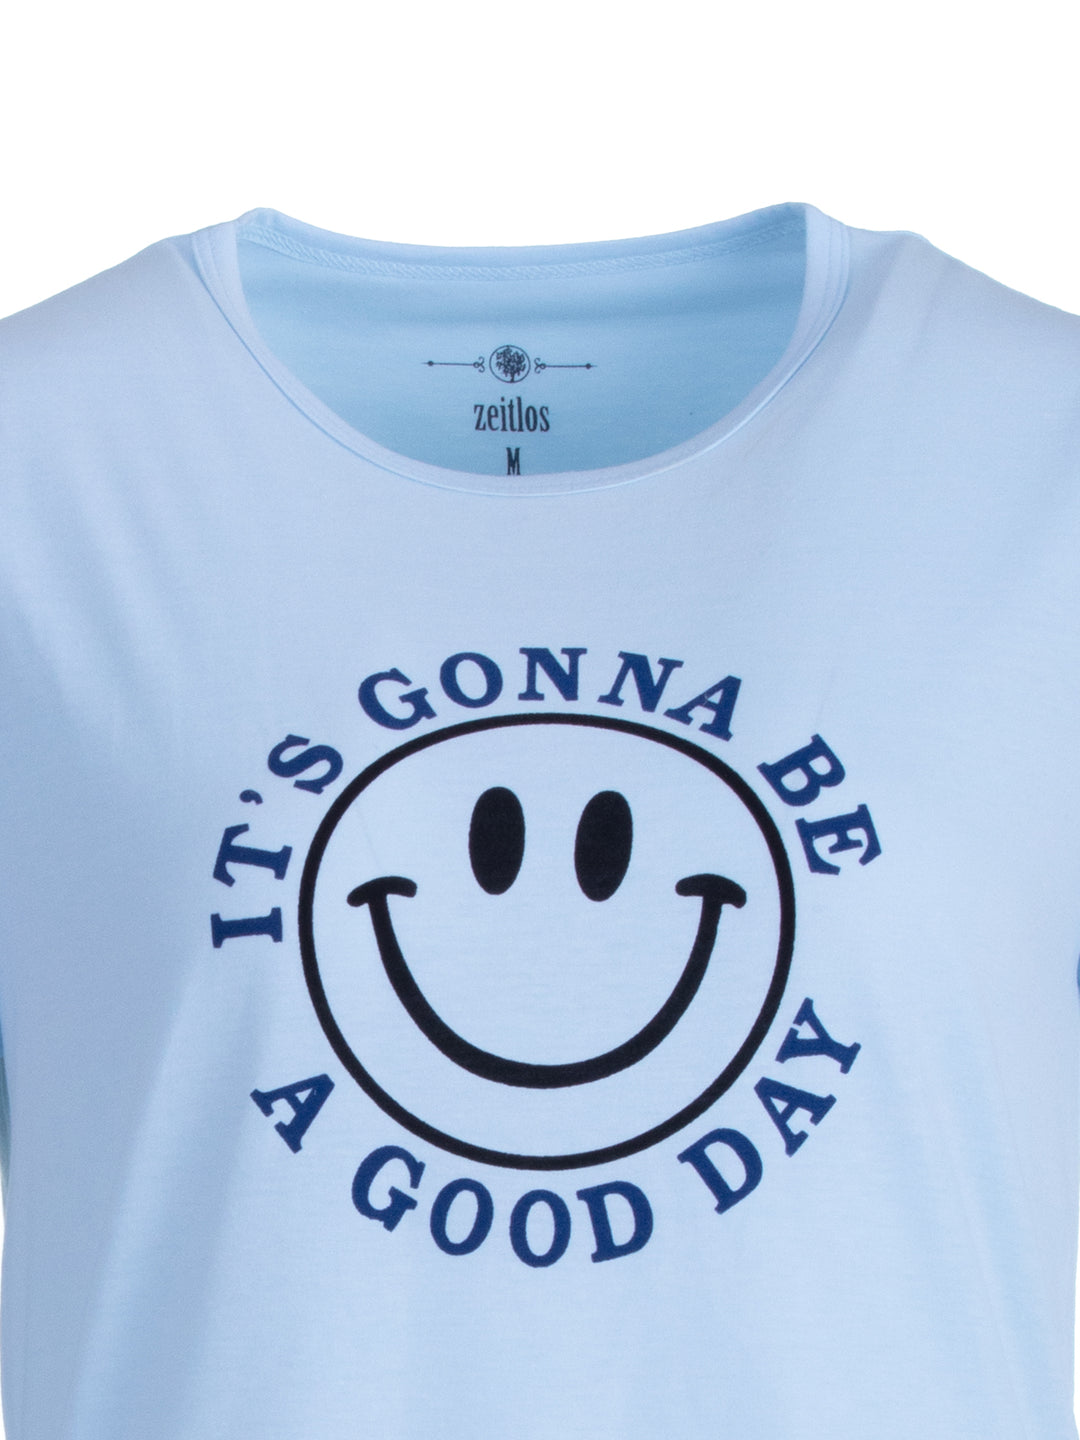 Nightgown short sleeve - smiley